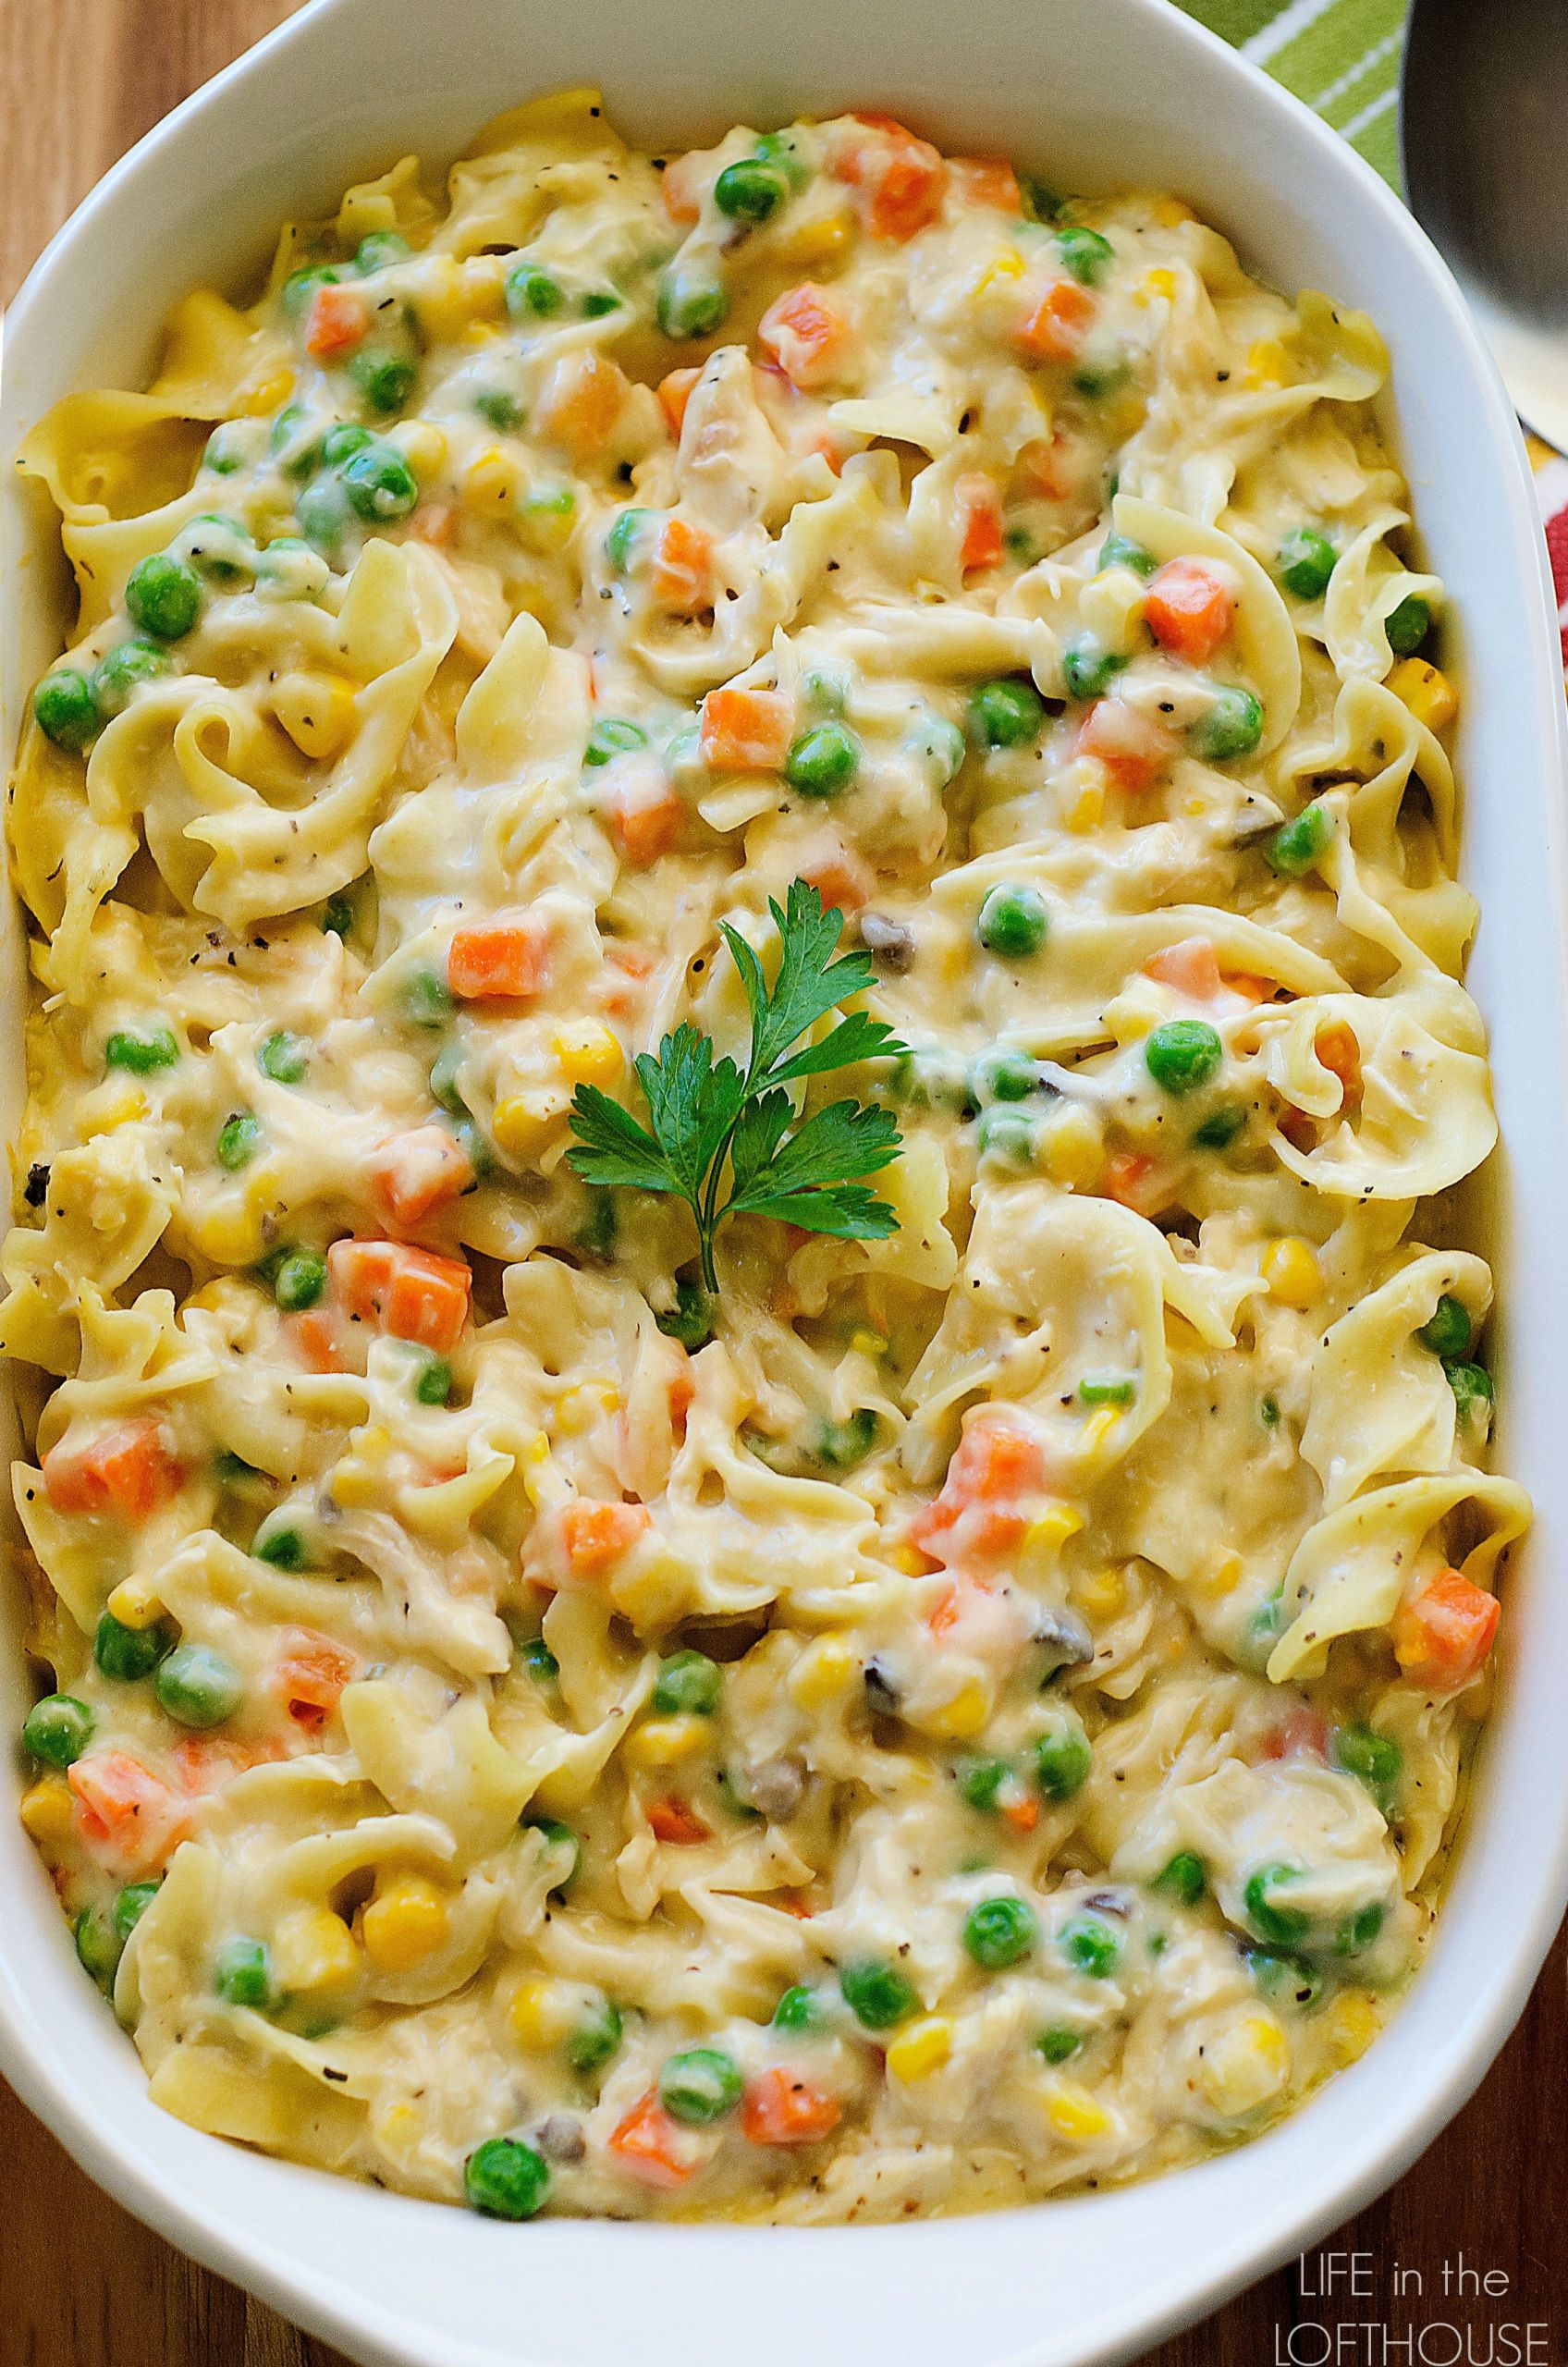 Recipes With Egg Noodles And Chicken
 Chicken Noodle Casserole Life In The Lofthouse